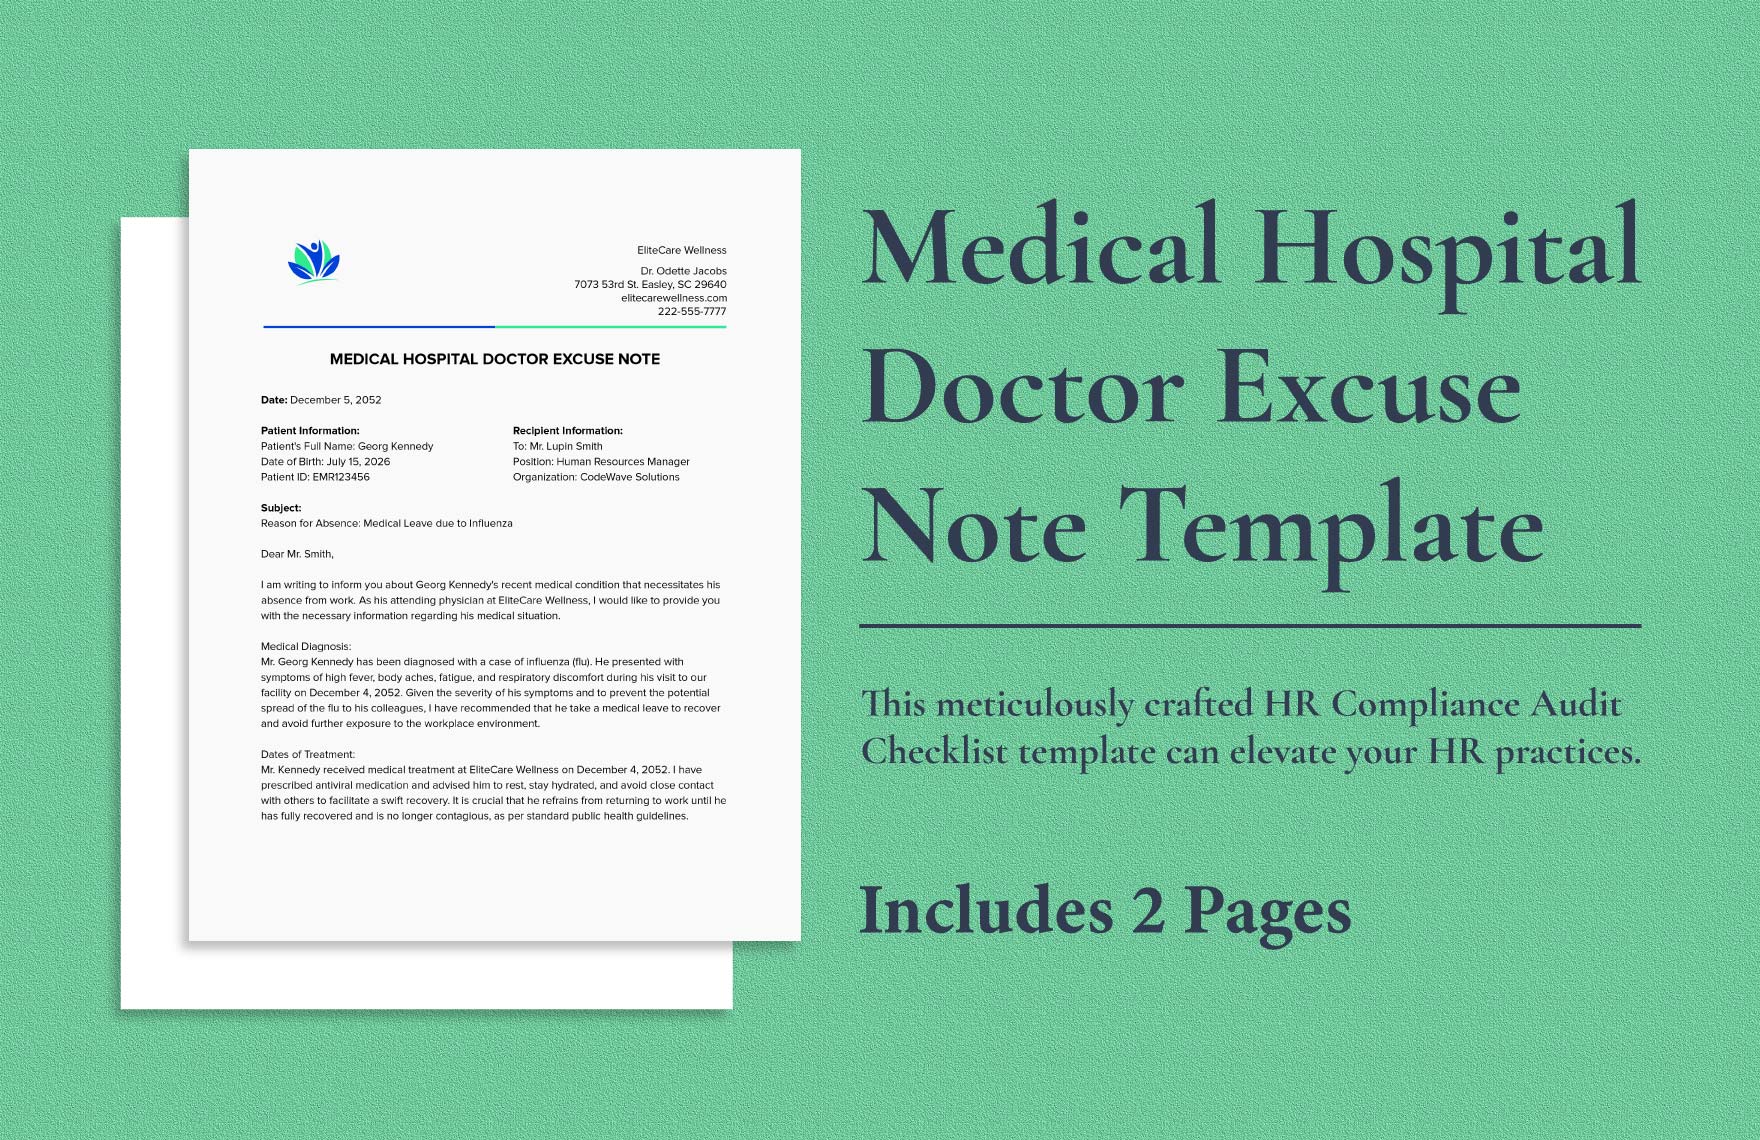 Medical Hospital Doctor Excuse Note Template